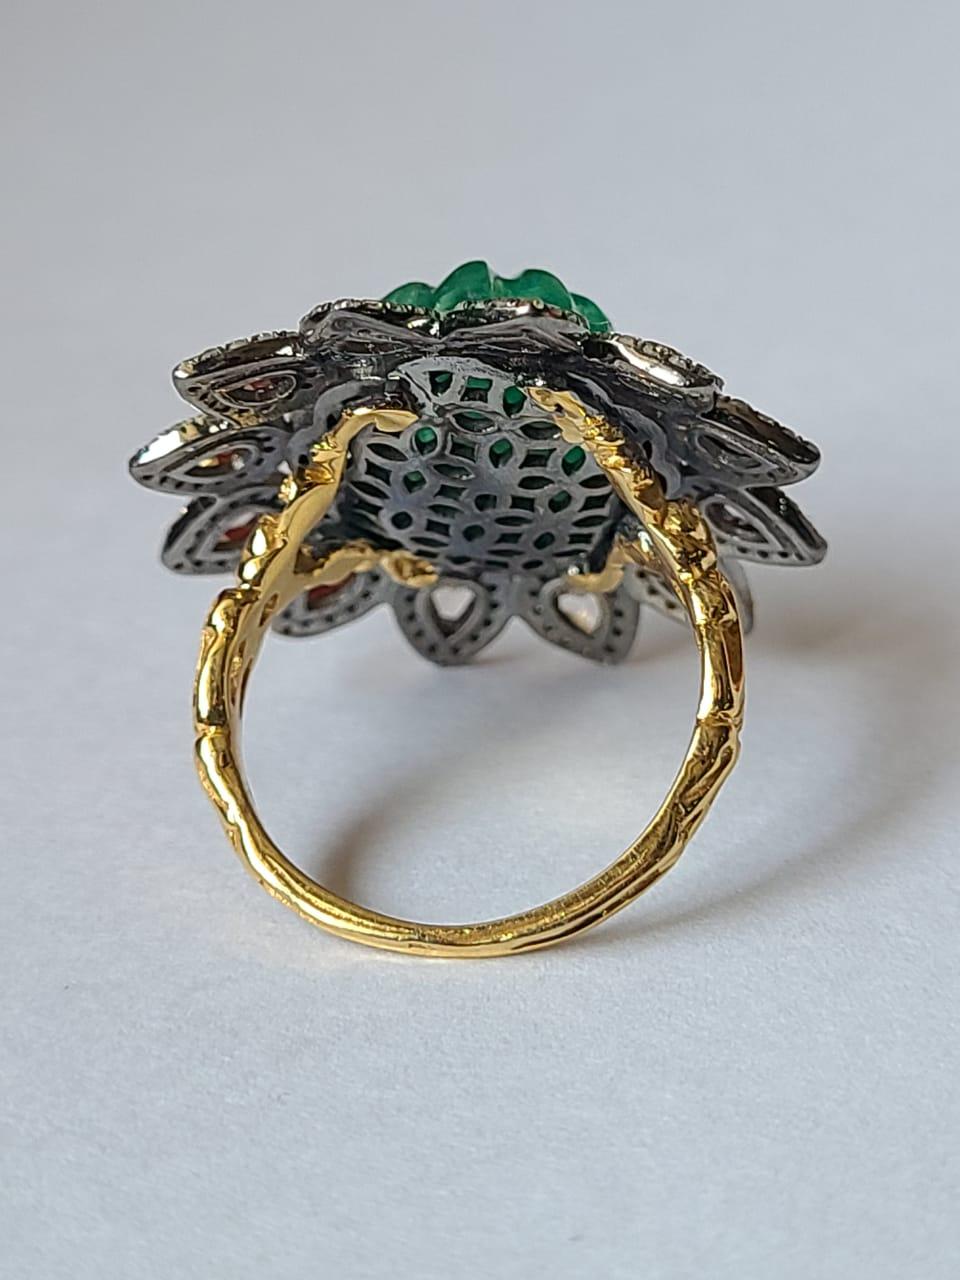 A very gorgeous Emerald & Diamonds, Victorian style, Art Deco Cocktail Ring set in 14K Gold & 925 Silver. The weight of the carved Emerald is 9.08 carats. The Emerald is completely natural, without any treatment and is of Zambian origin. The weight